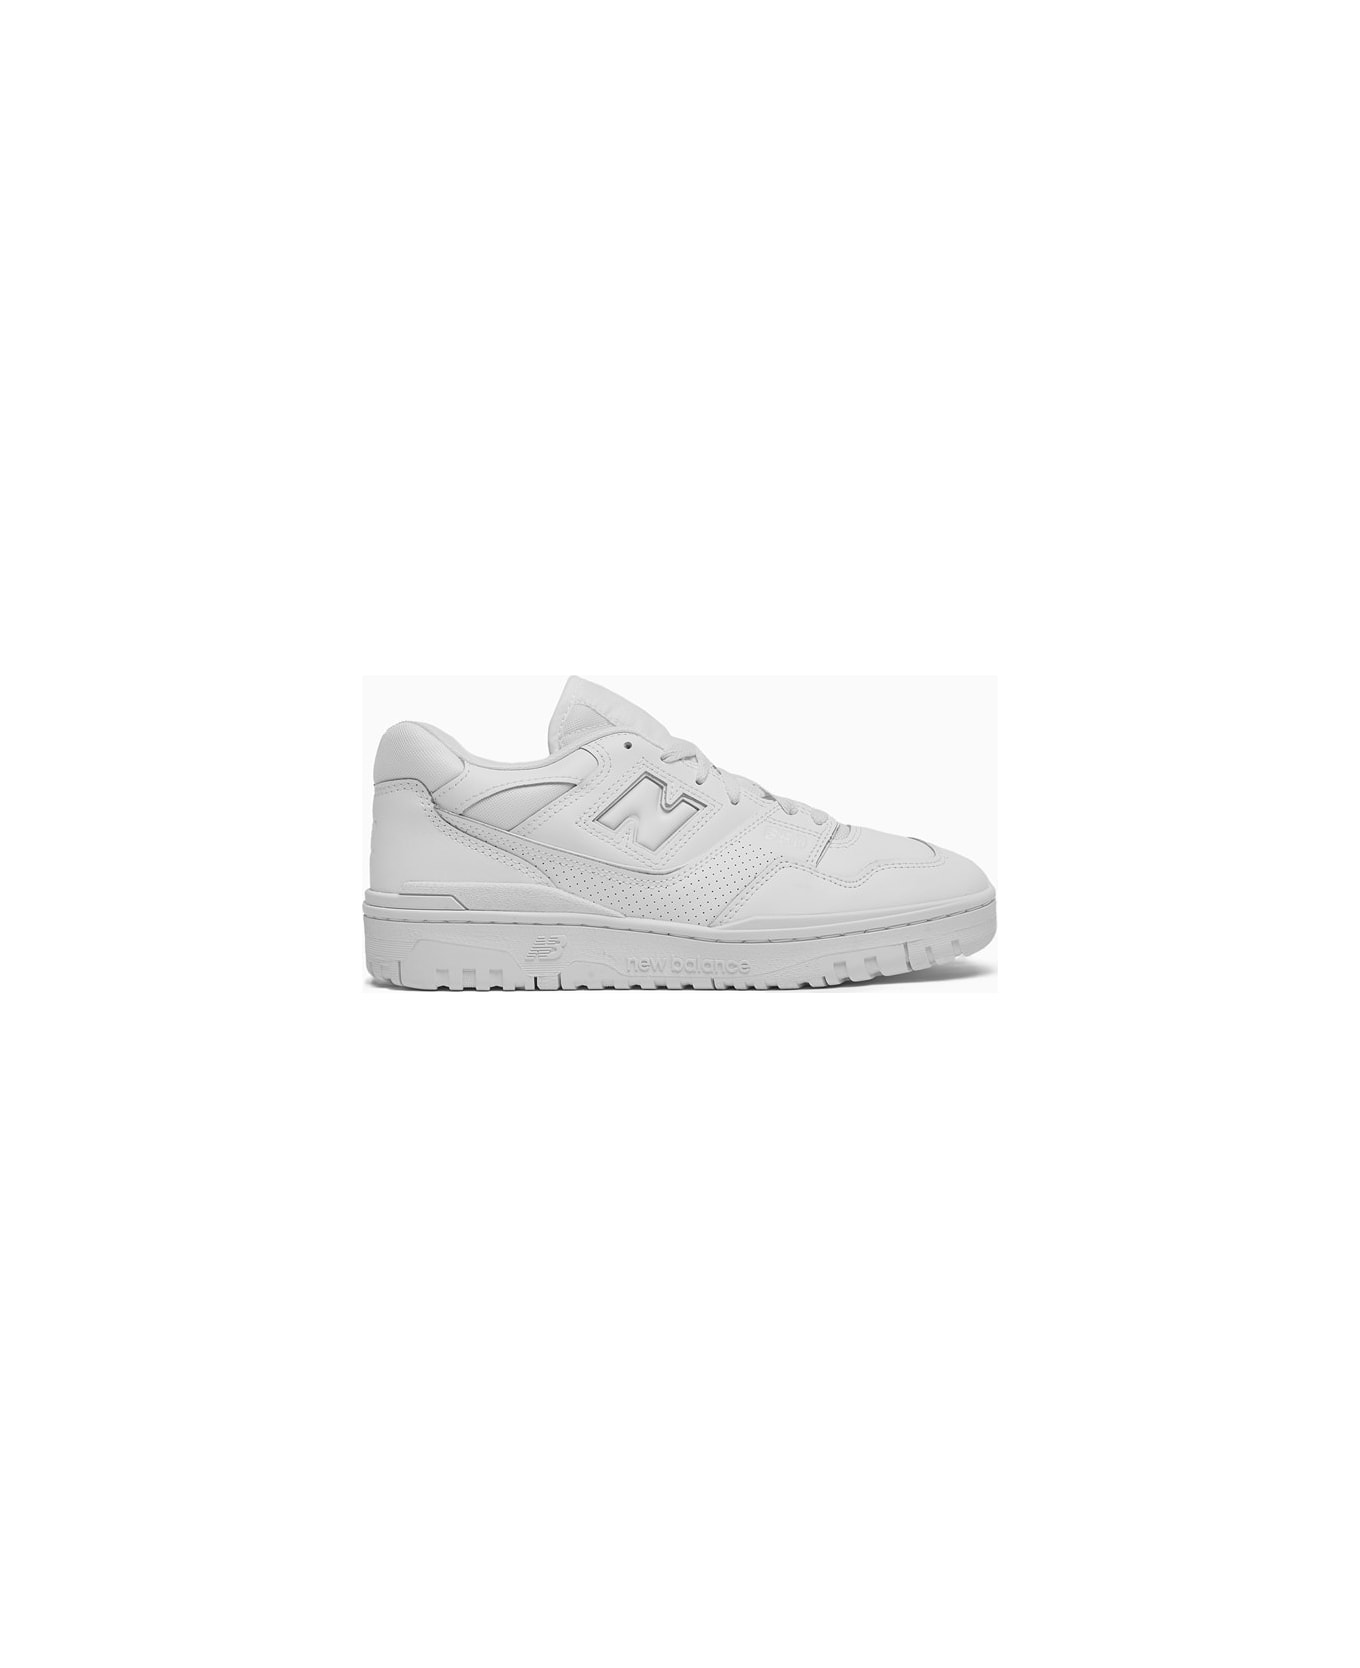 New Balance Sneakers Gsb550ww Gs - WHITE